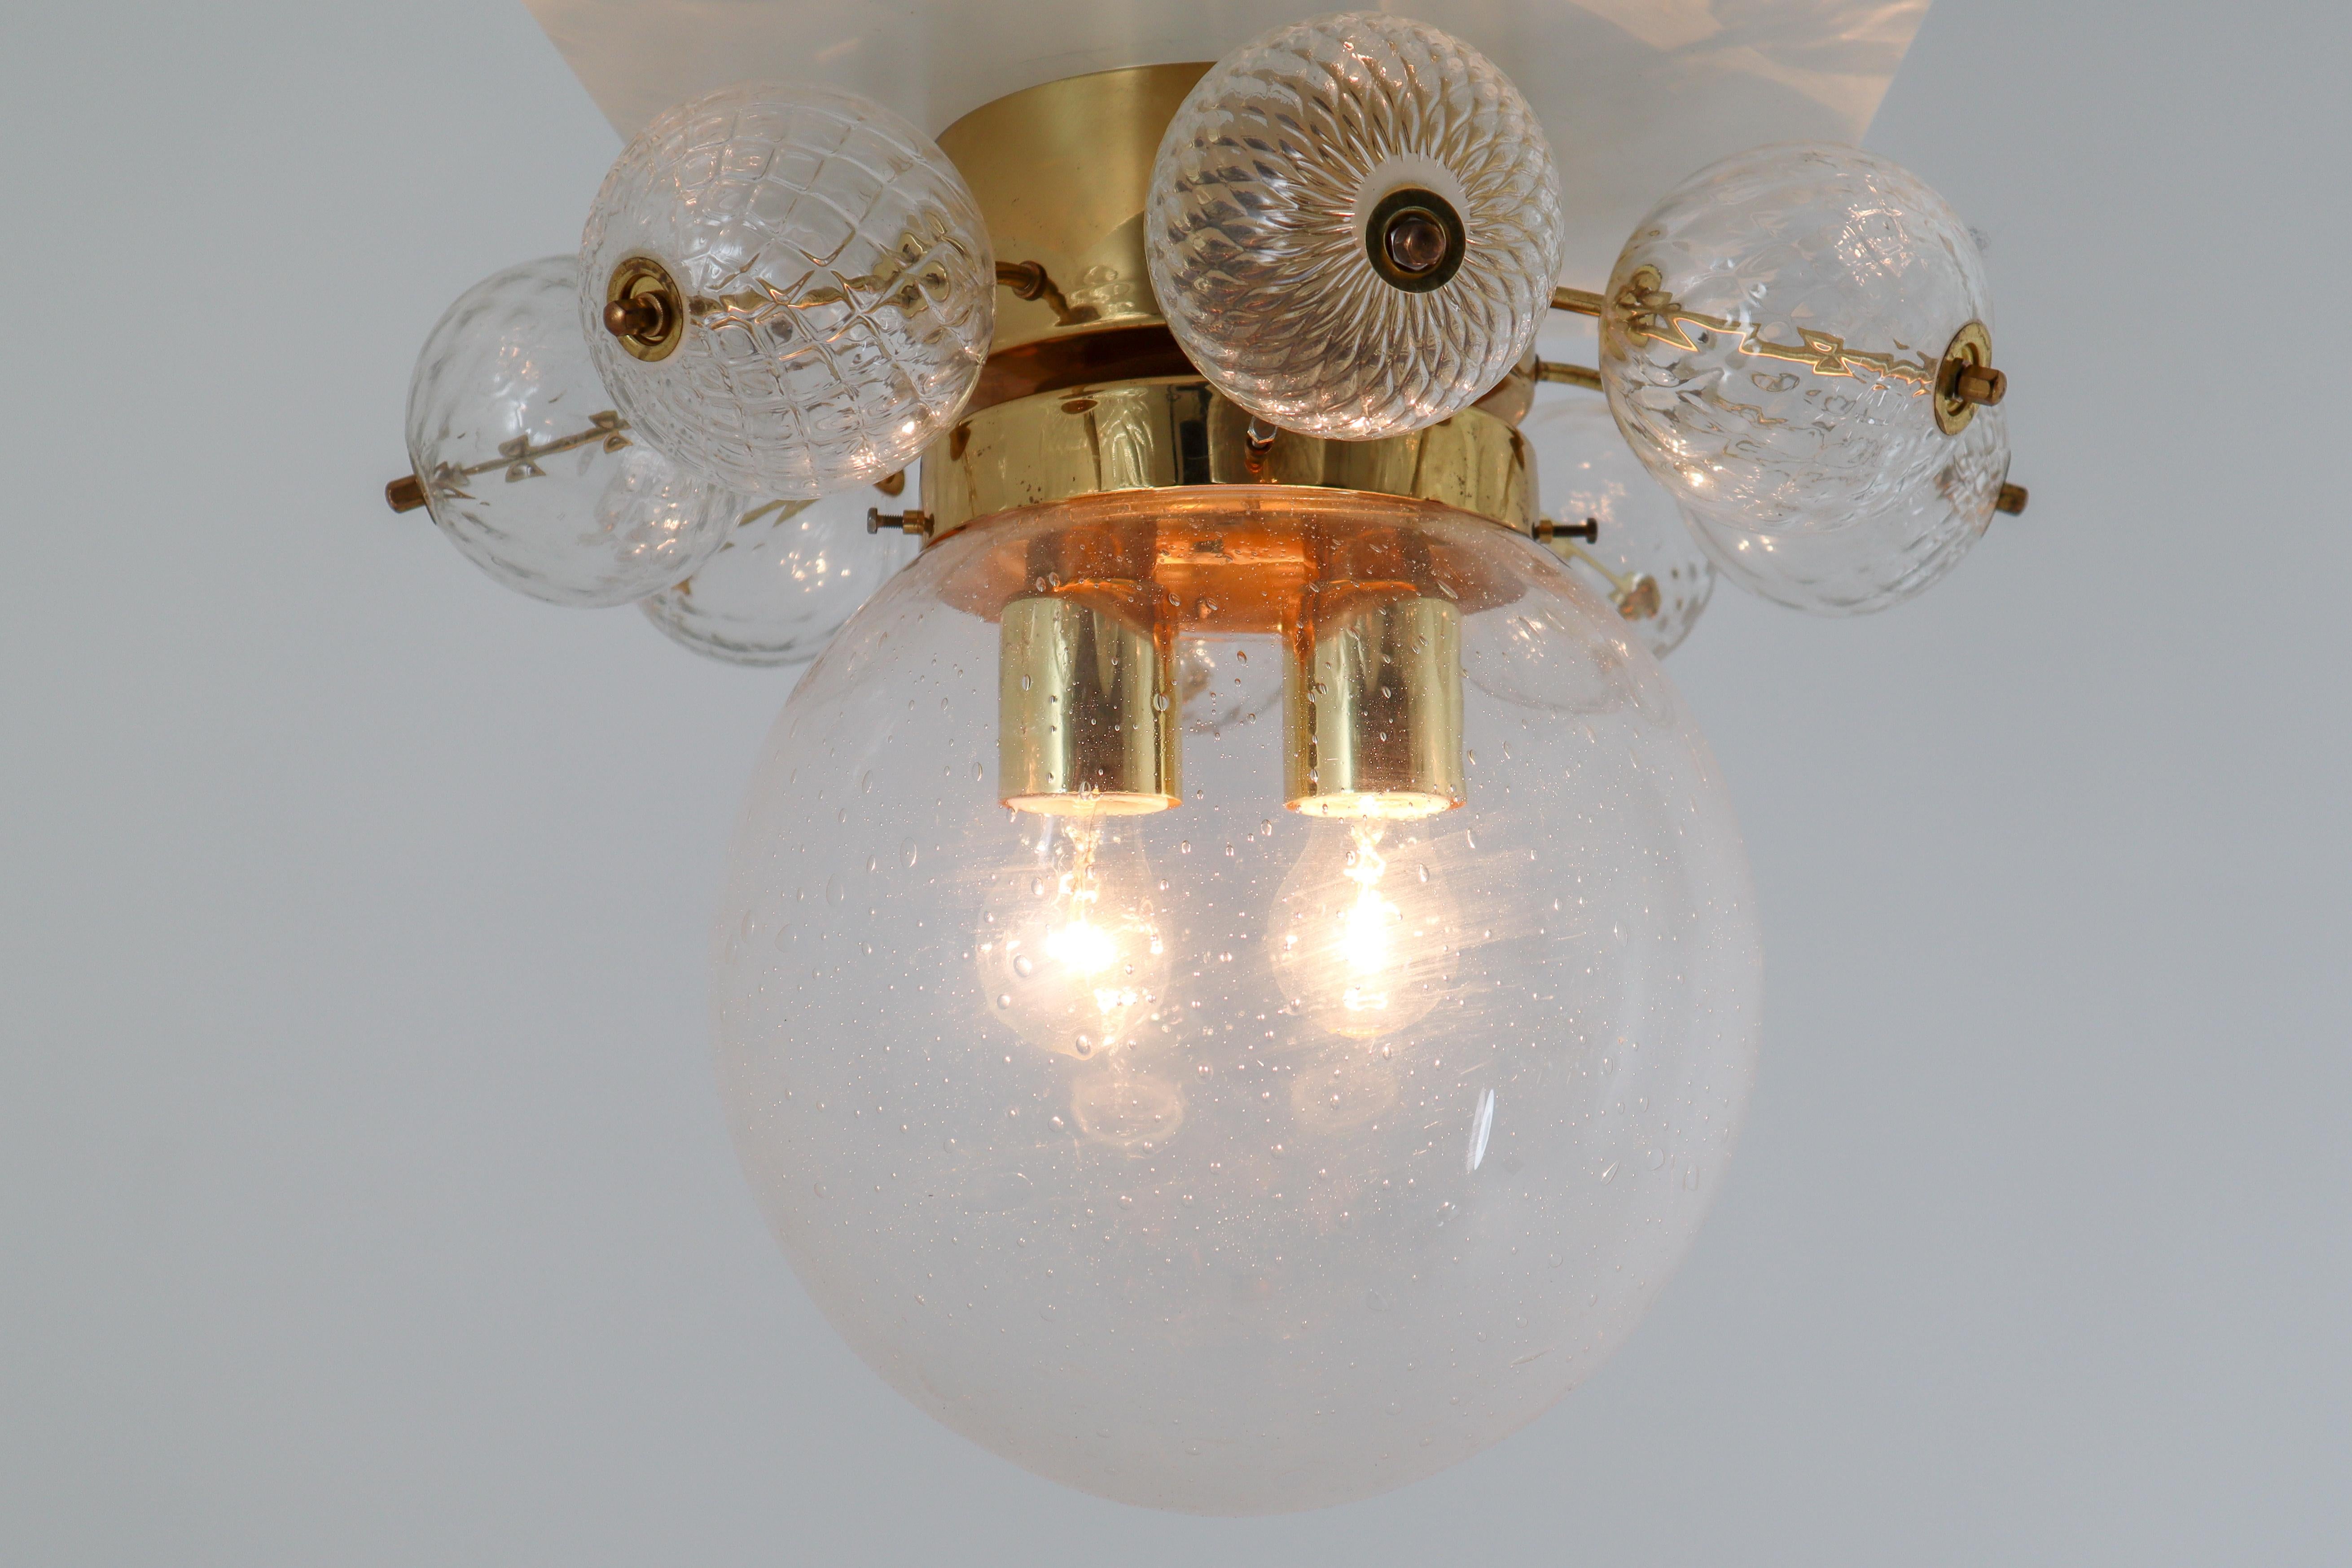 Large set ceiling lamp chandeliers with brass base and large handblown glass globe. The lights are beautifully decorated thanks to the structured glass. The pleasant light it spreads is very atmospheric, these large ceiling lamp-chandeliers will